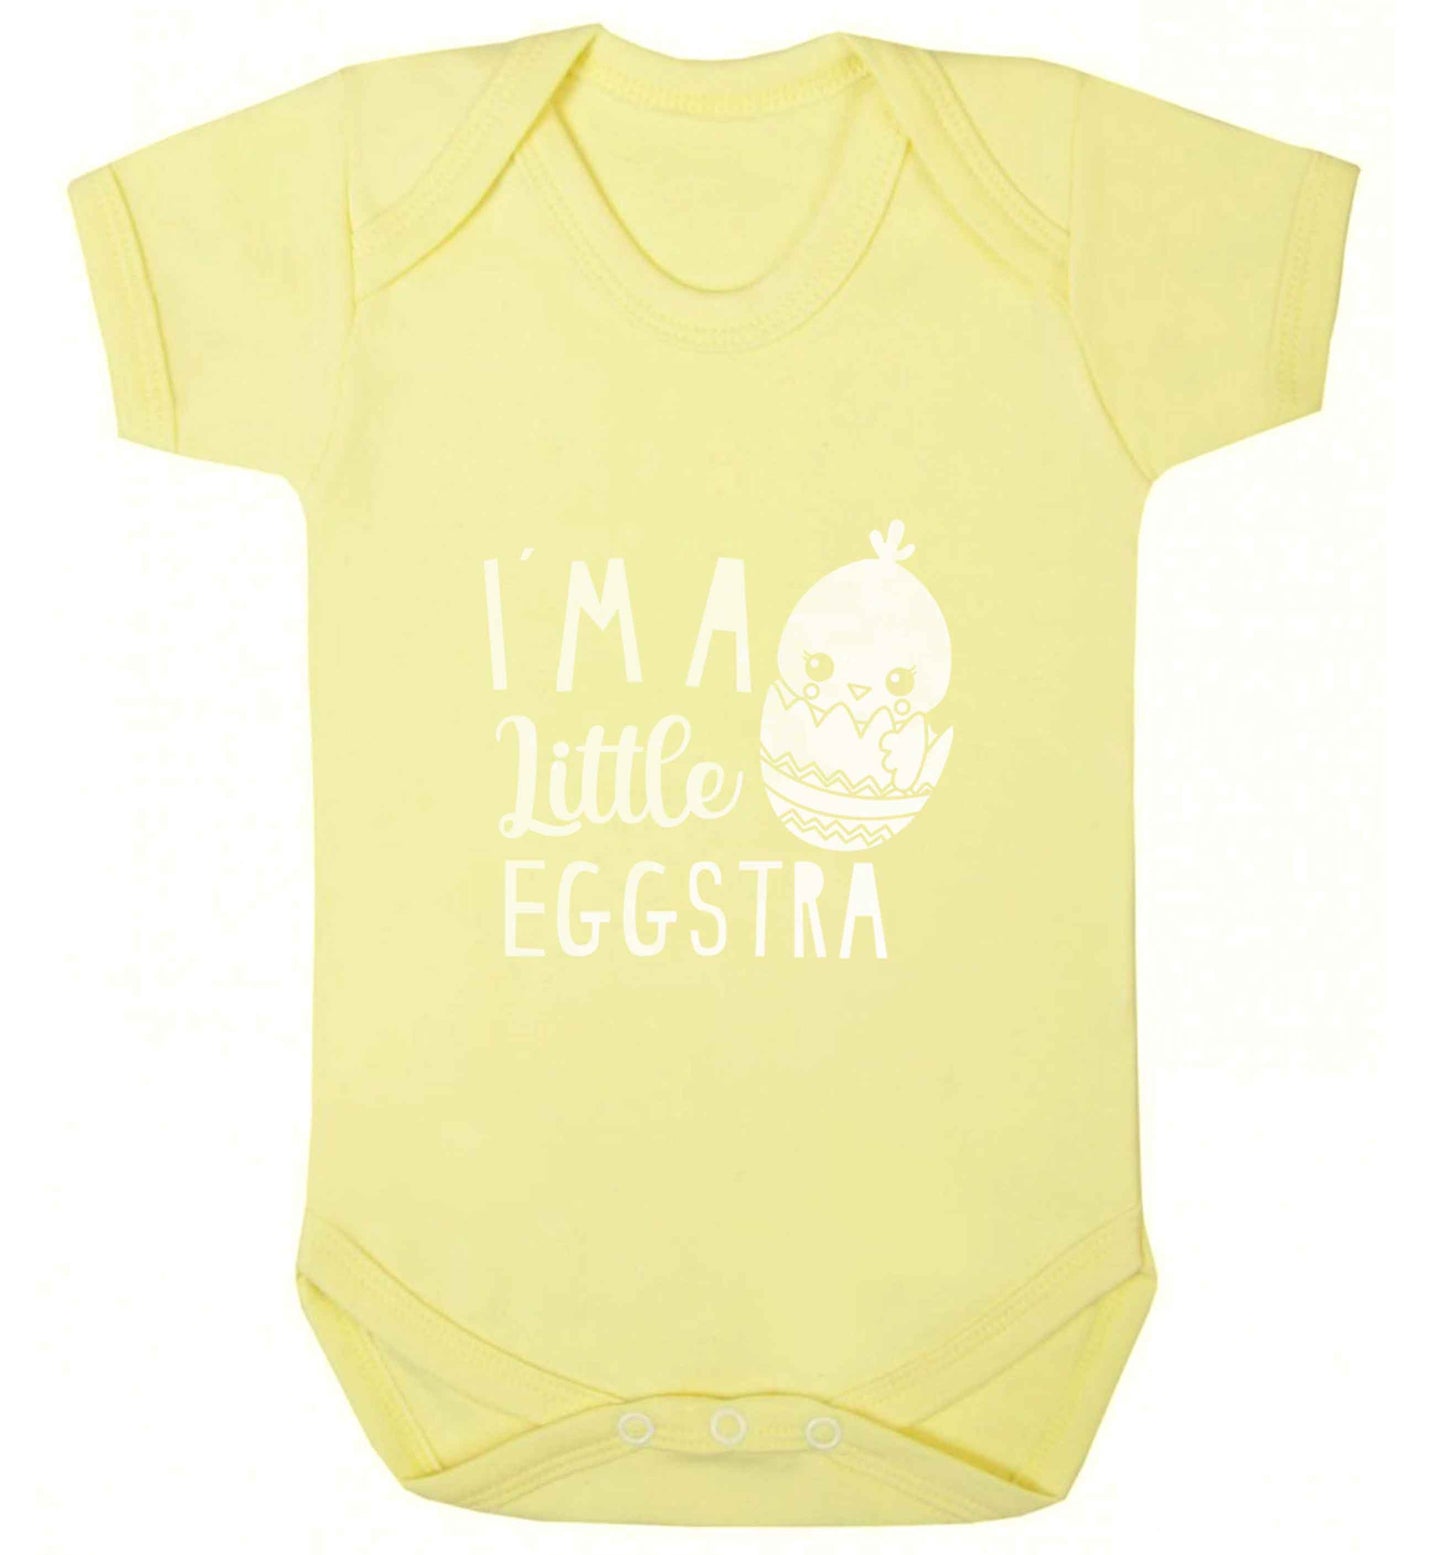 I'm a little eggstra baby vest pale yellow 18-24 months